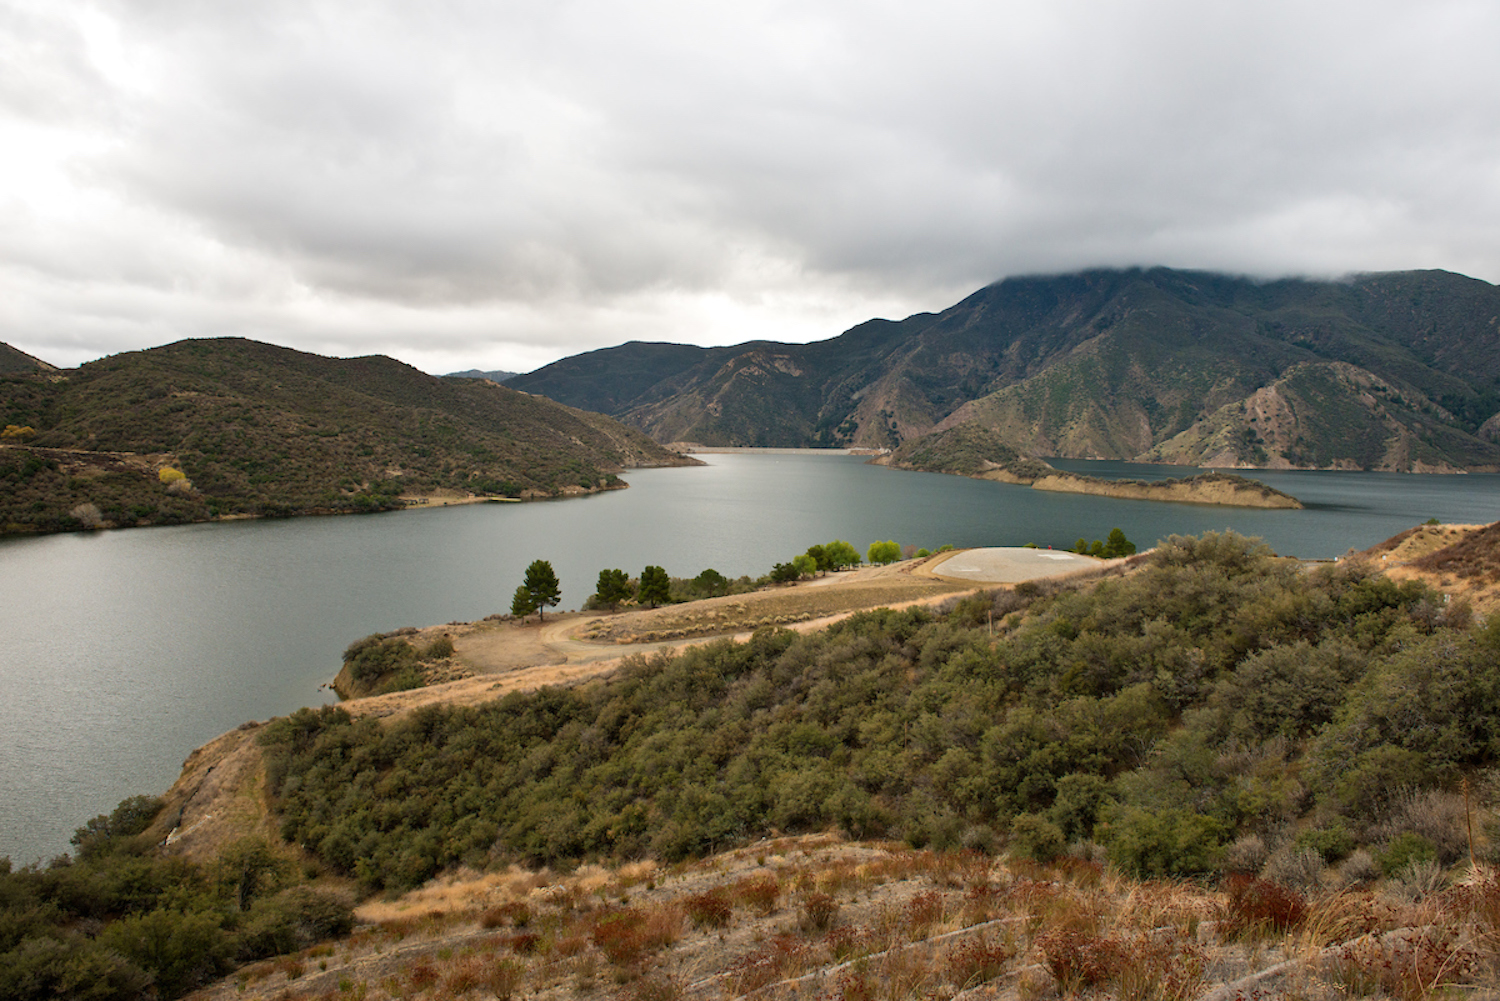 A view from the California Department of Water Resources Vista Del Lago Visitor Center located on a bluff overlooking Pyramid Lake in Los Angeles County.